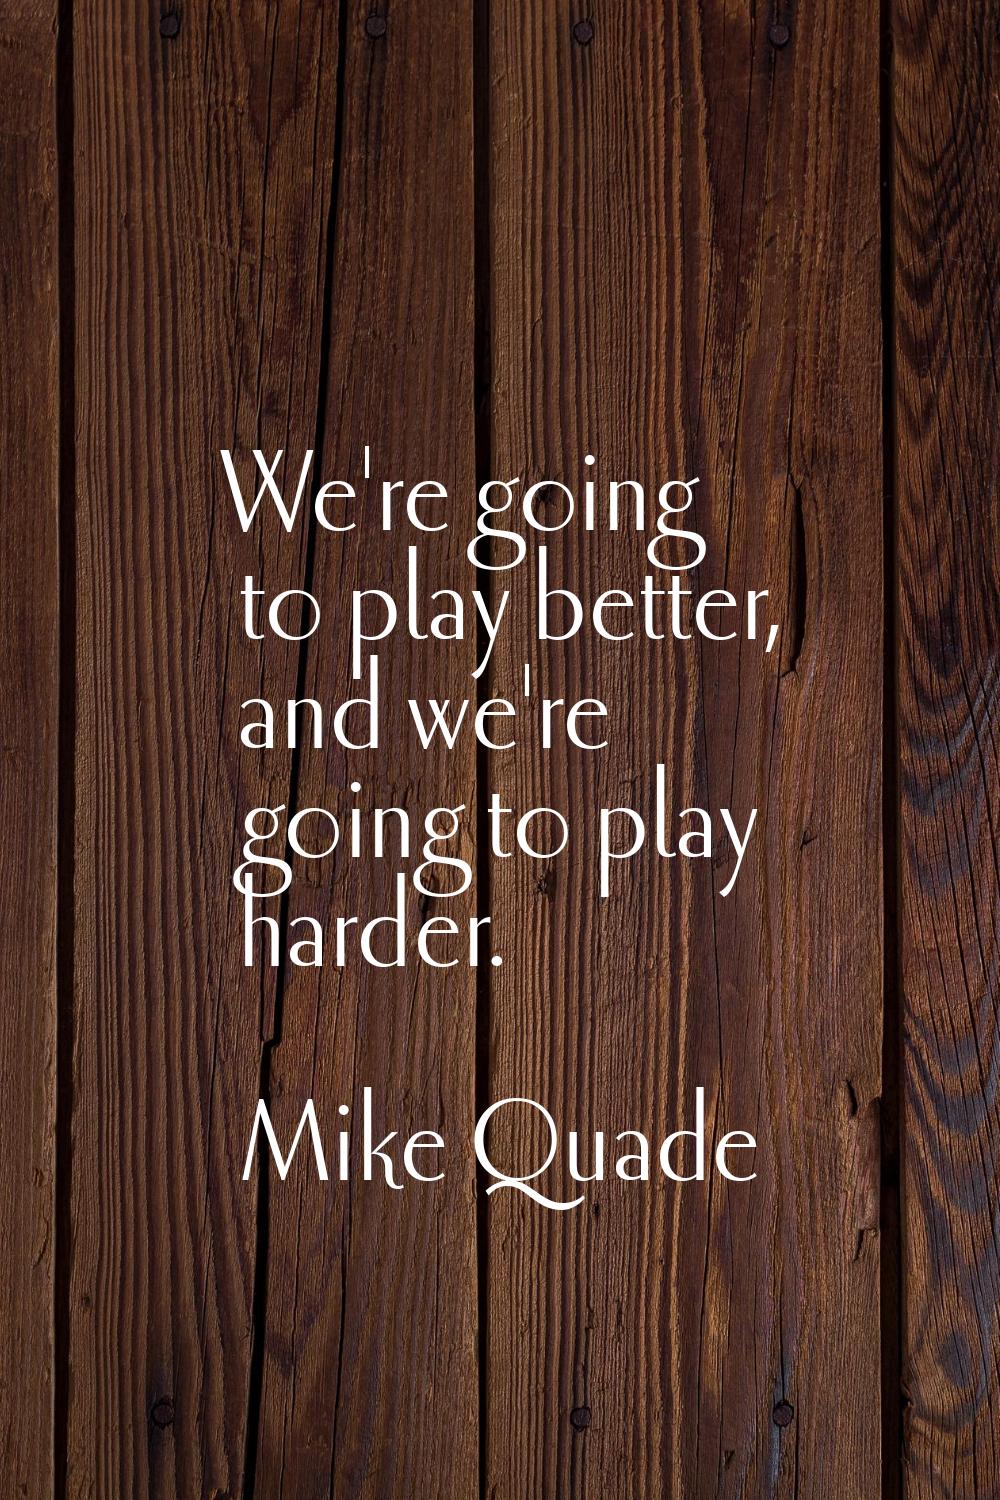 We're going to play better, and we're going to play harder.